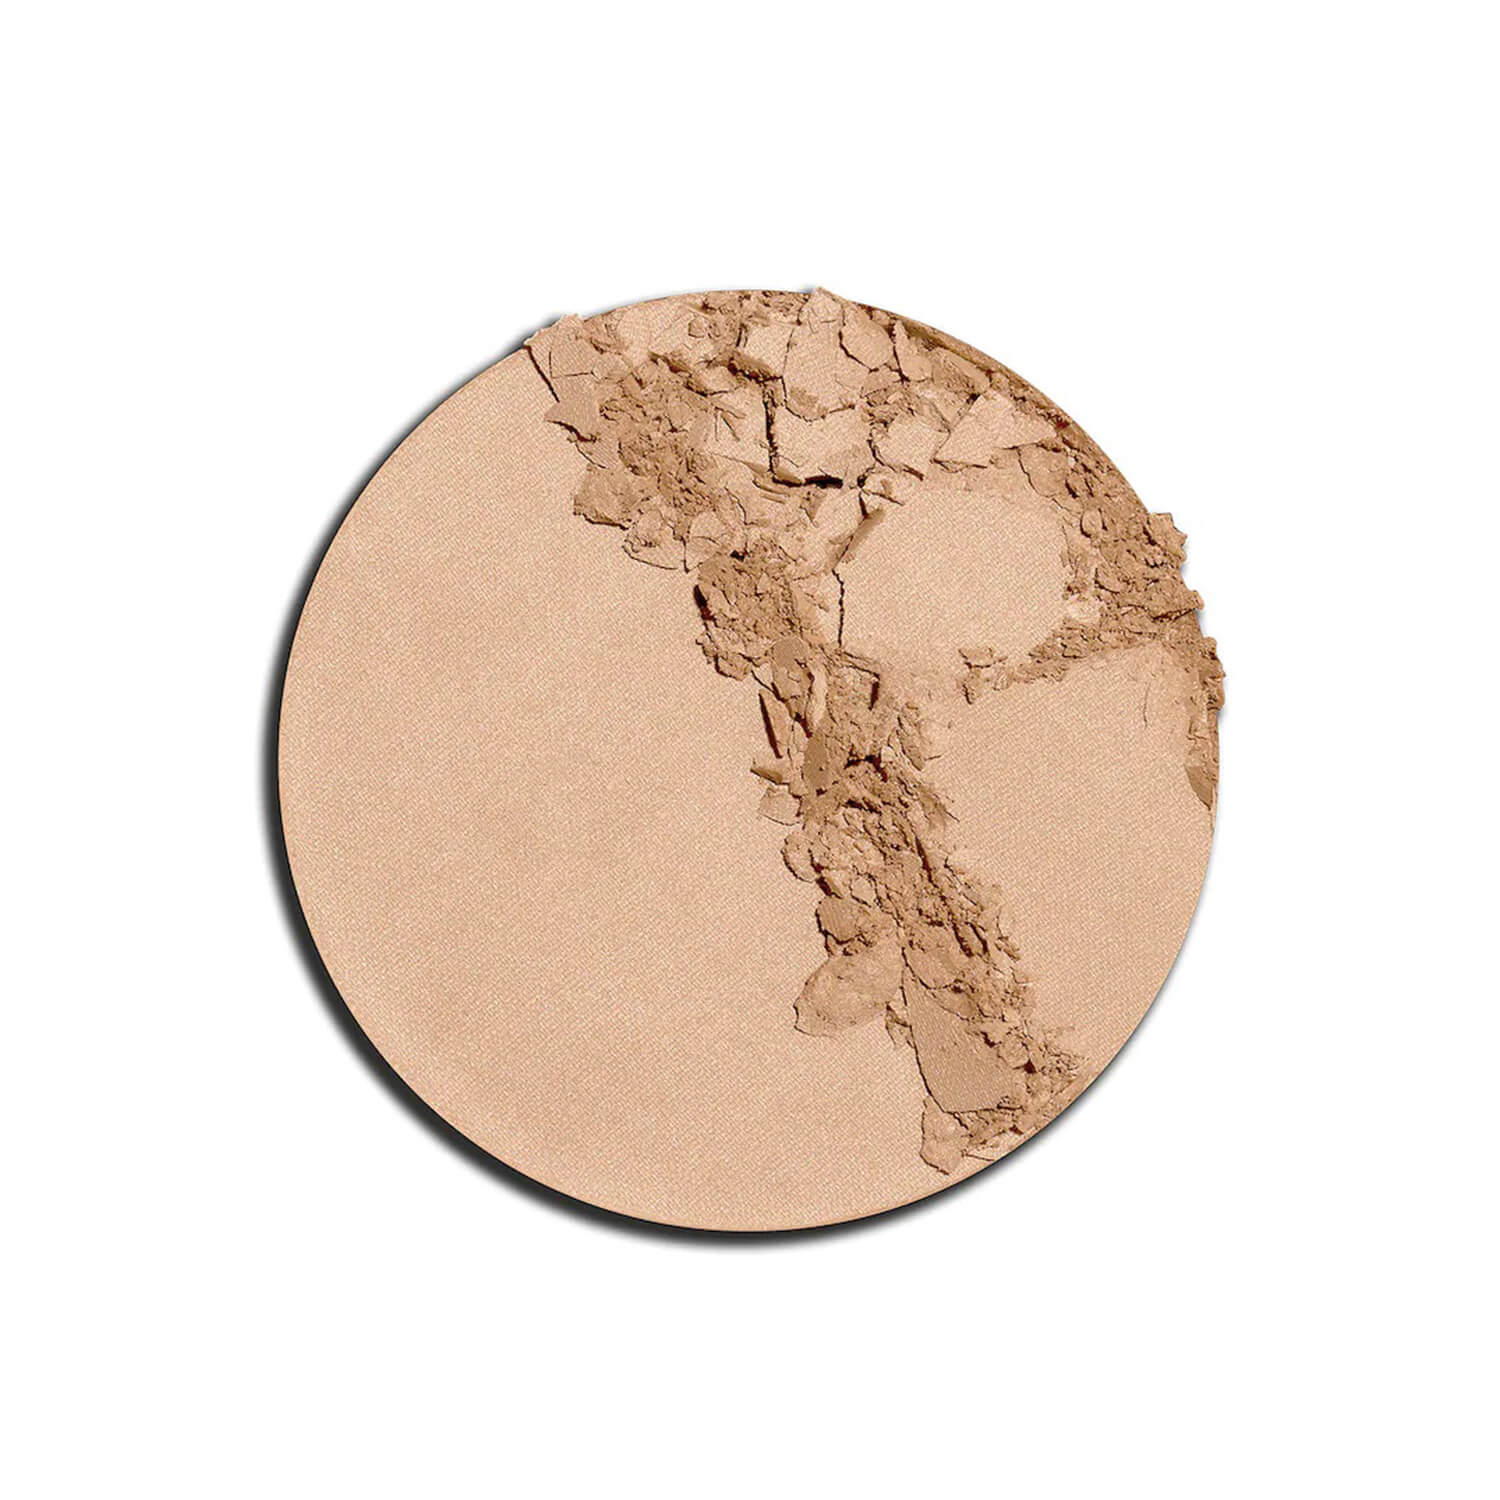 Huda beauty GloWish Luminous Pressed Powder available at heygirl.pk for cash on delivery in Pakistan